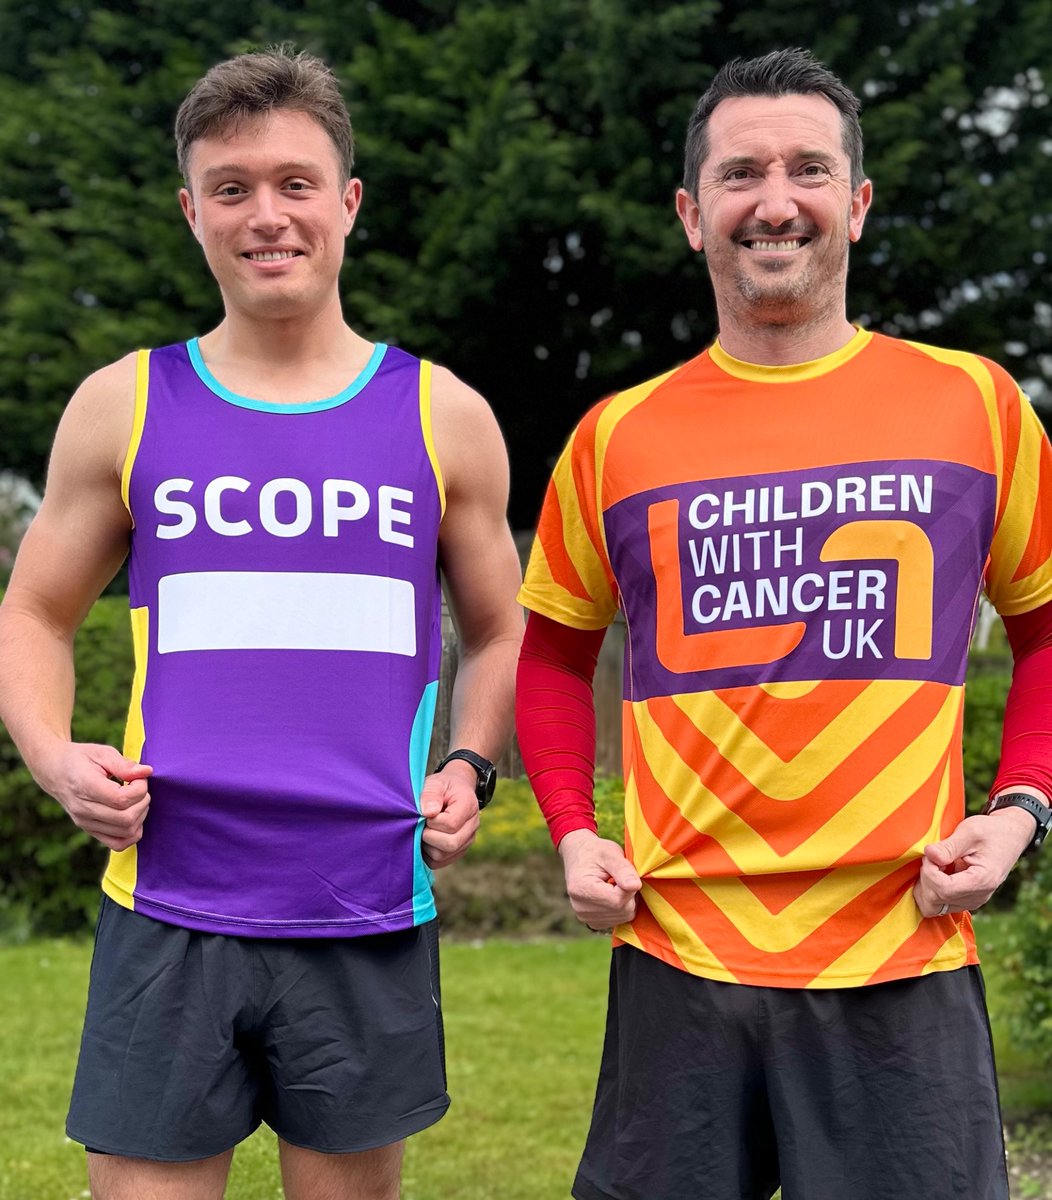 This weekend we will be supporting Michael and Tom as they take on the #LondonMarathon in support of @CwC_UK and @scope. Head to our LinkedIn if you would like the links to support 🏃🏃 #youcandoit #fundraising